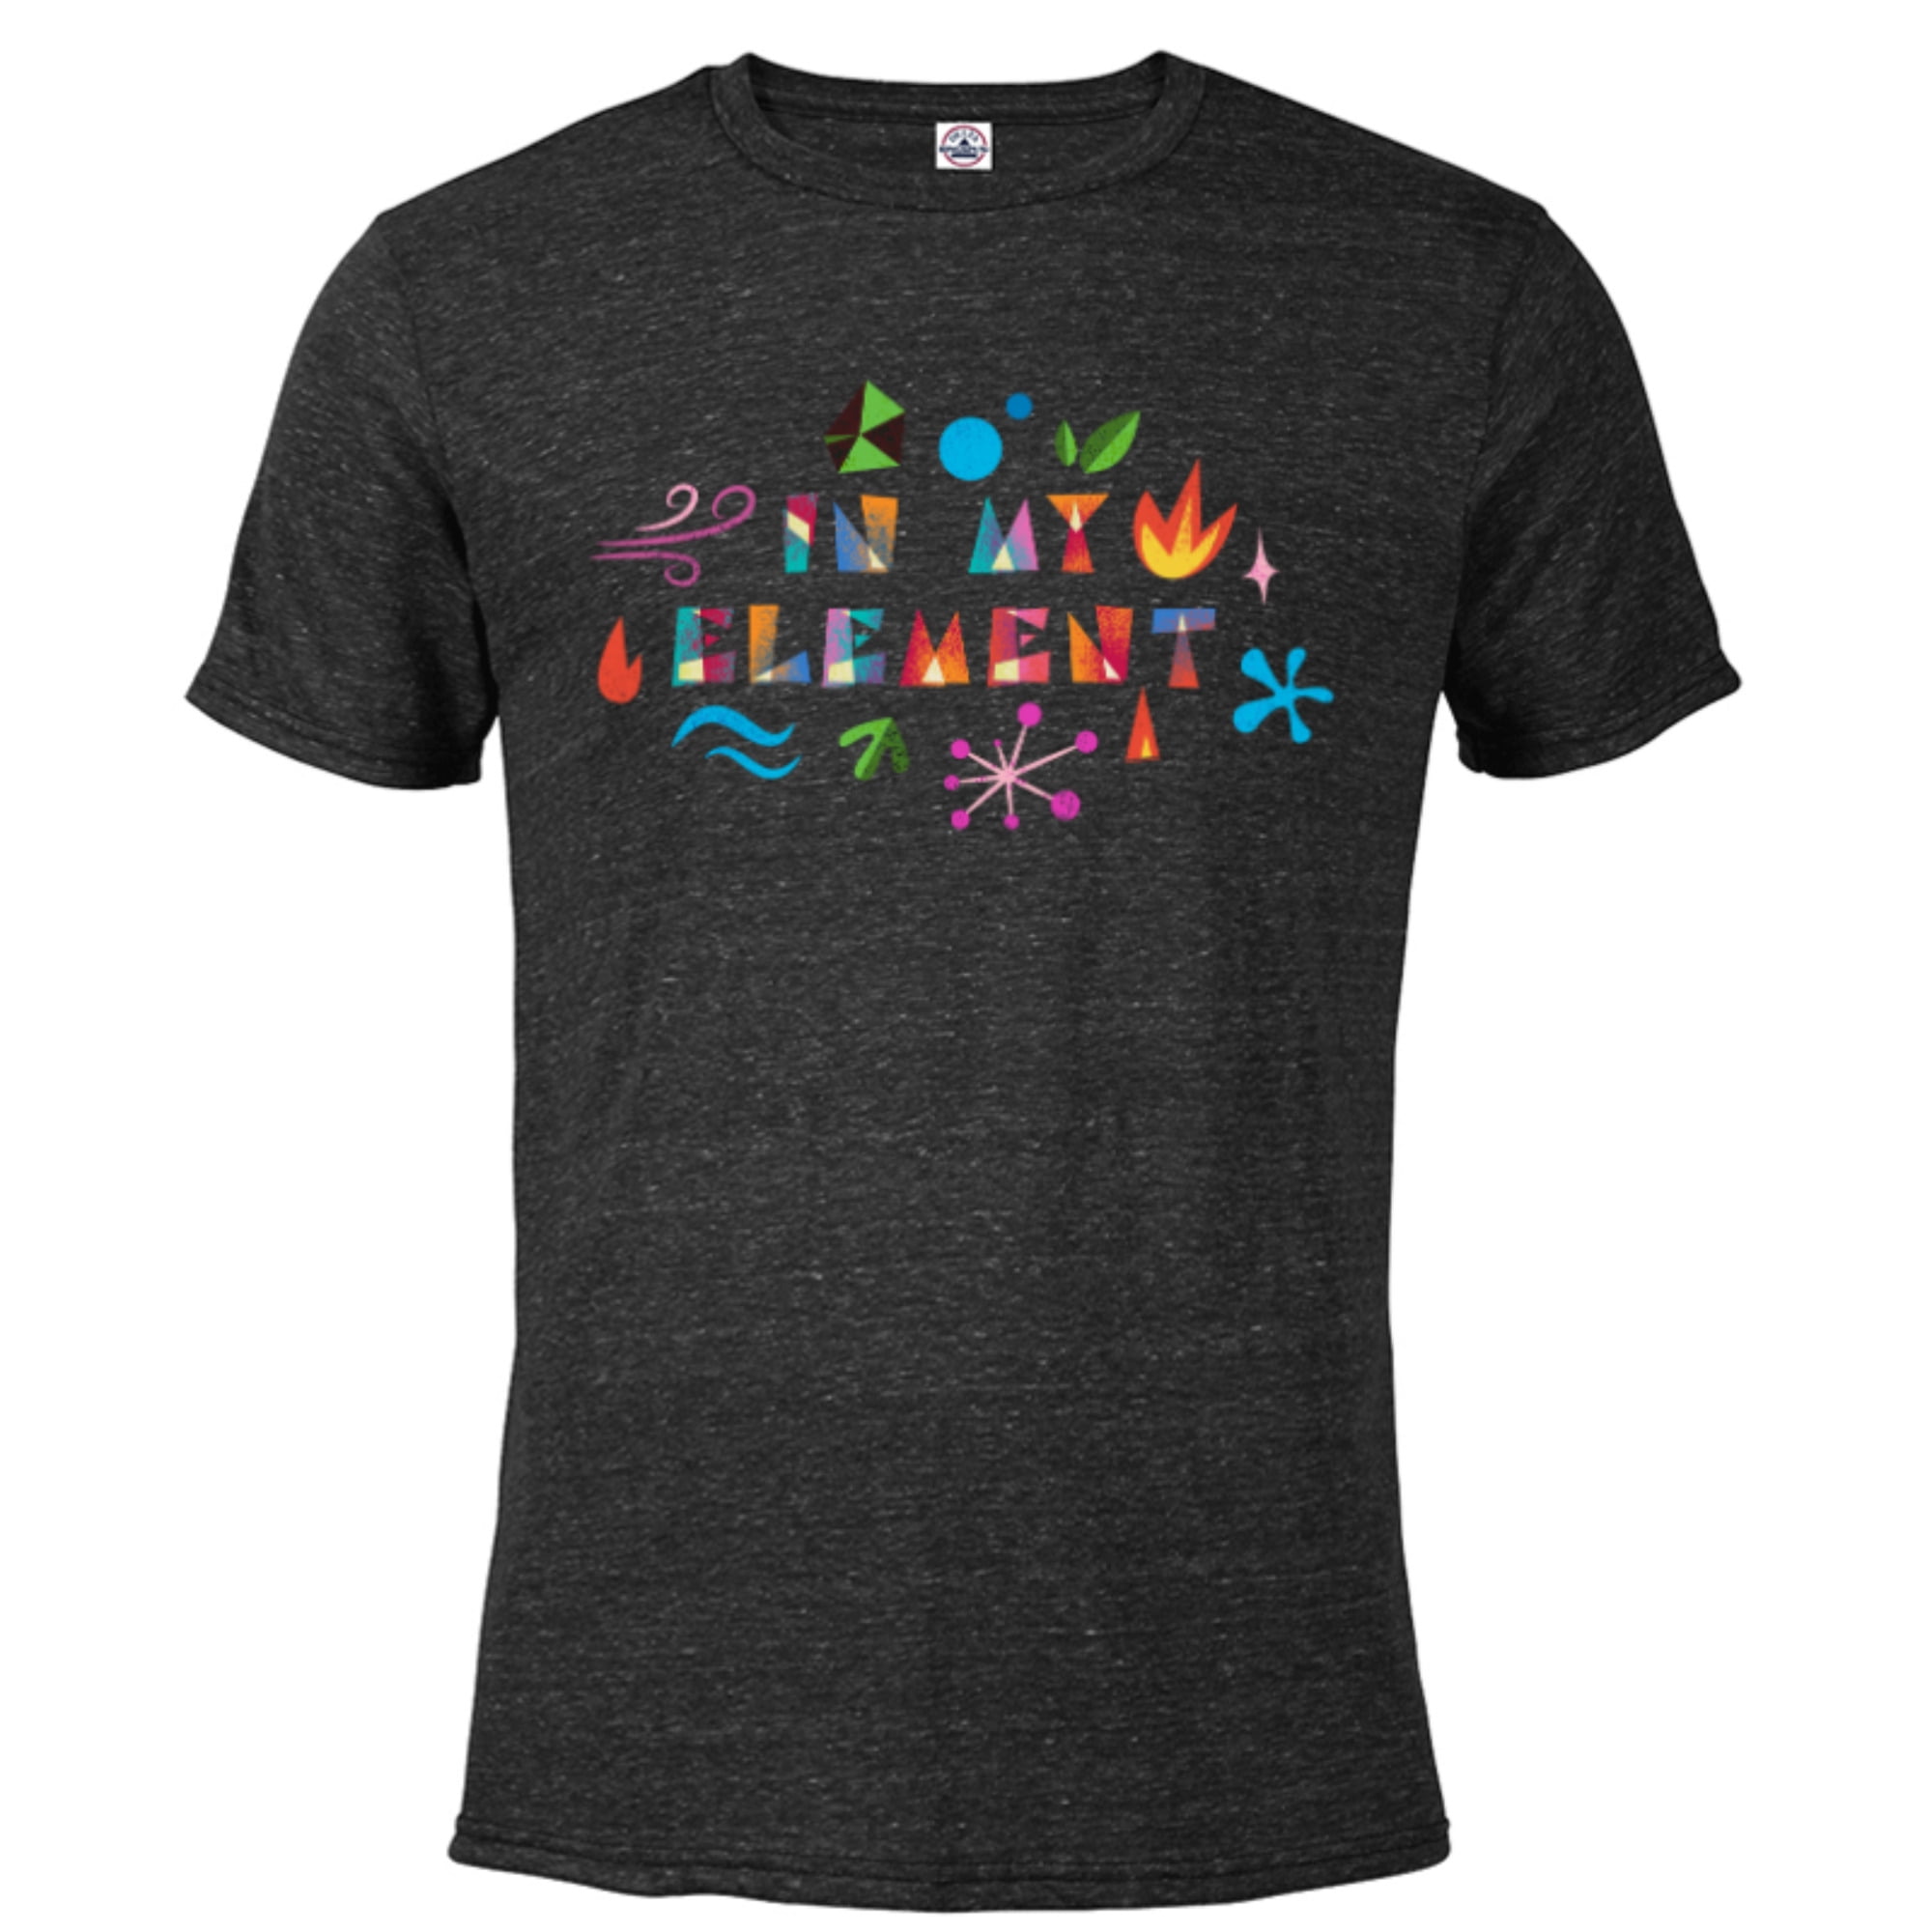 Kanon Brug for støbt Disney and Pixar's Elemental In My Element - Short Sleeve Blended T-Shirt  for Adults - Customized-Black Snow Heather - Walmart.com